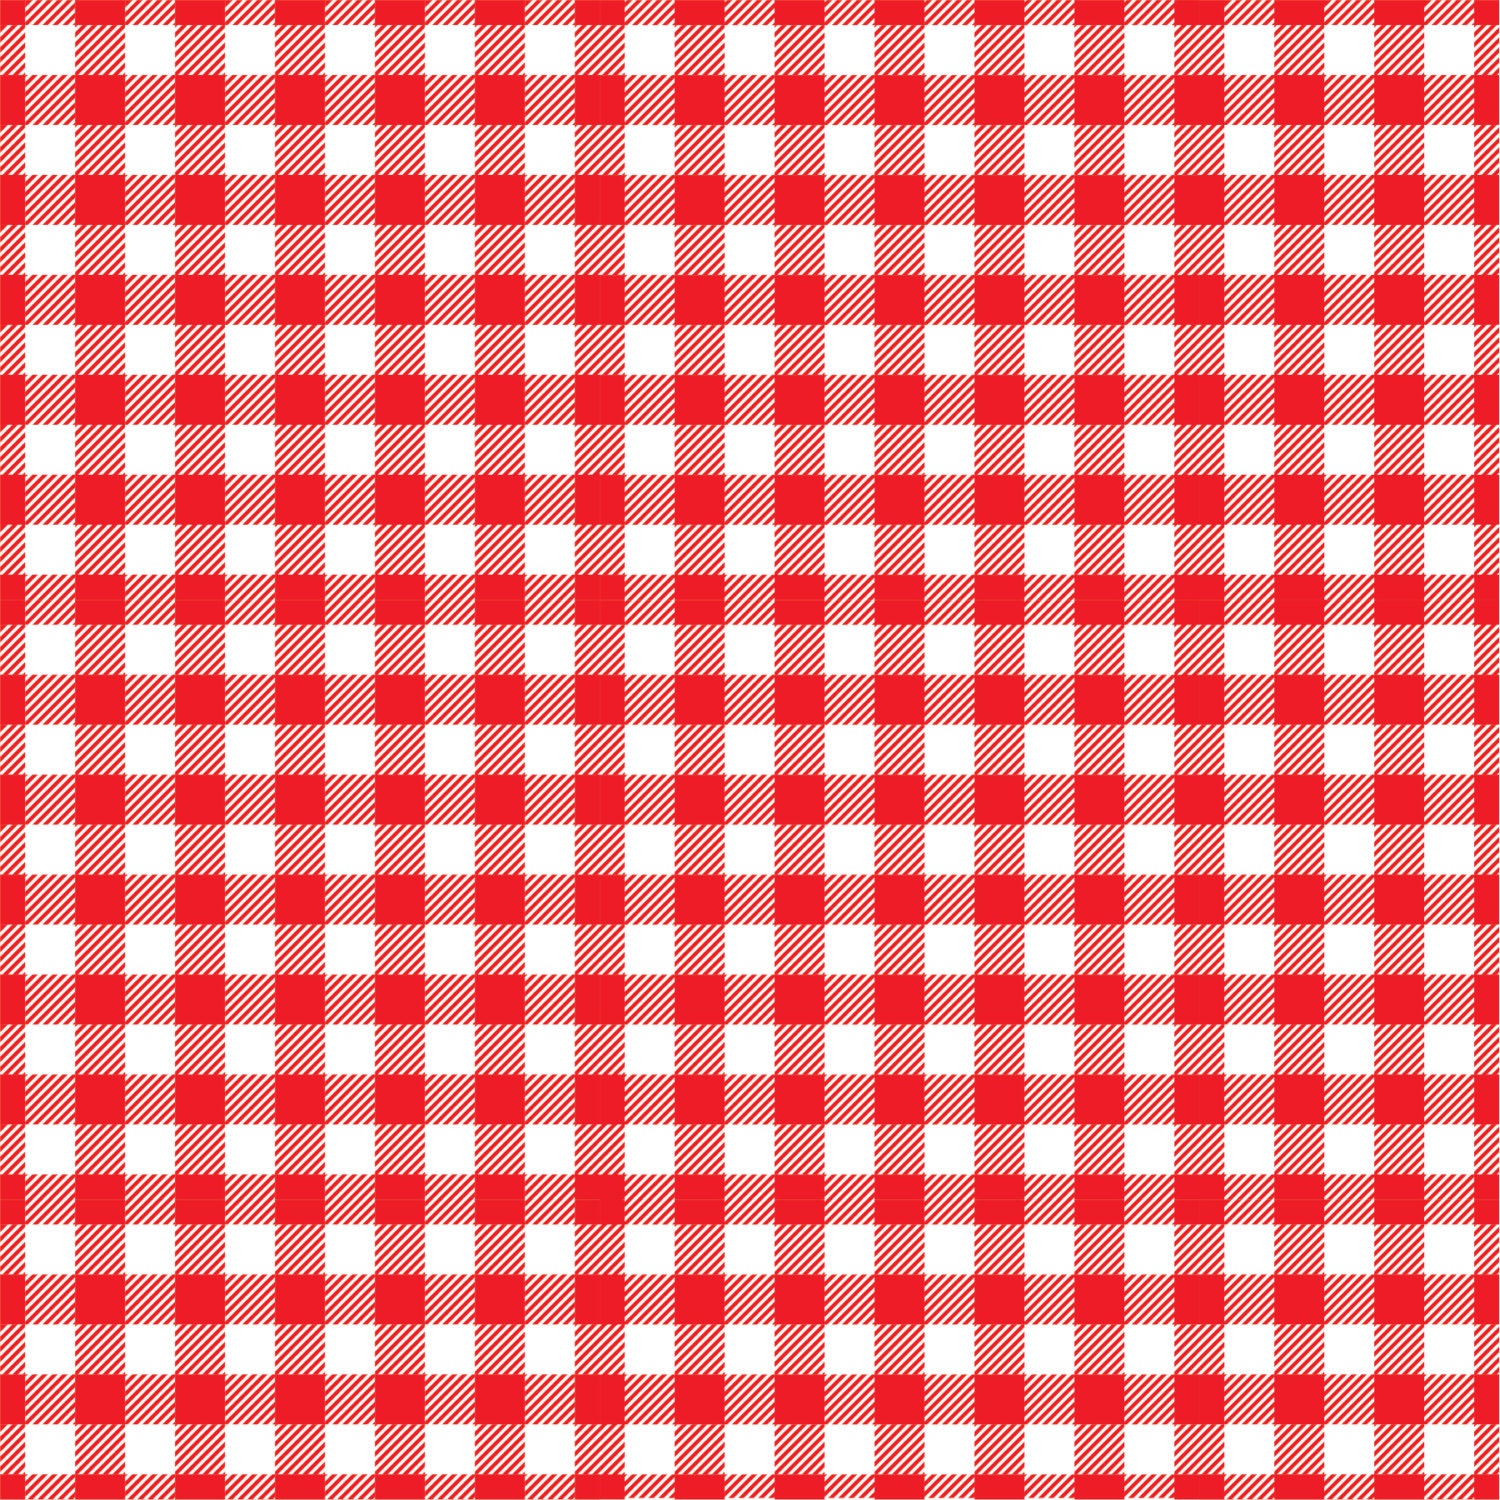 Red Gingham Heat Transfer Or Adhesive Vinyl Sheet Red And HD Wallpapers Download Free Images Wallpaper [wallpaper981.blogspot.com]